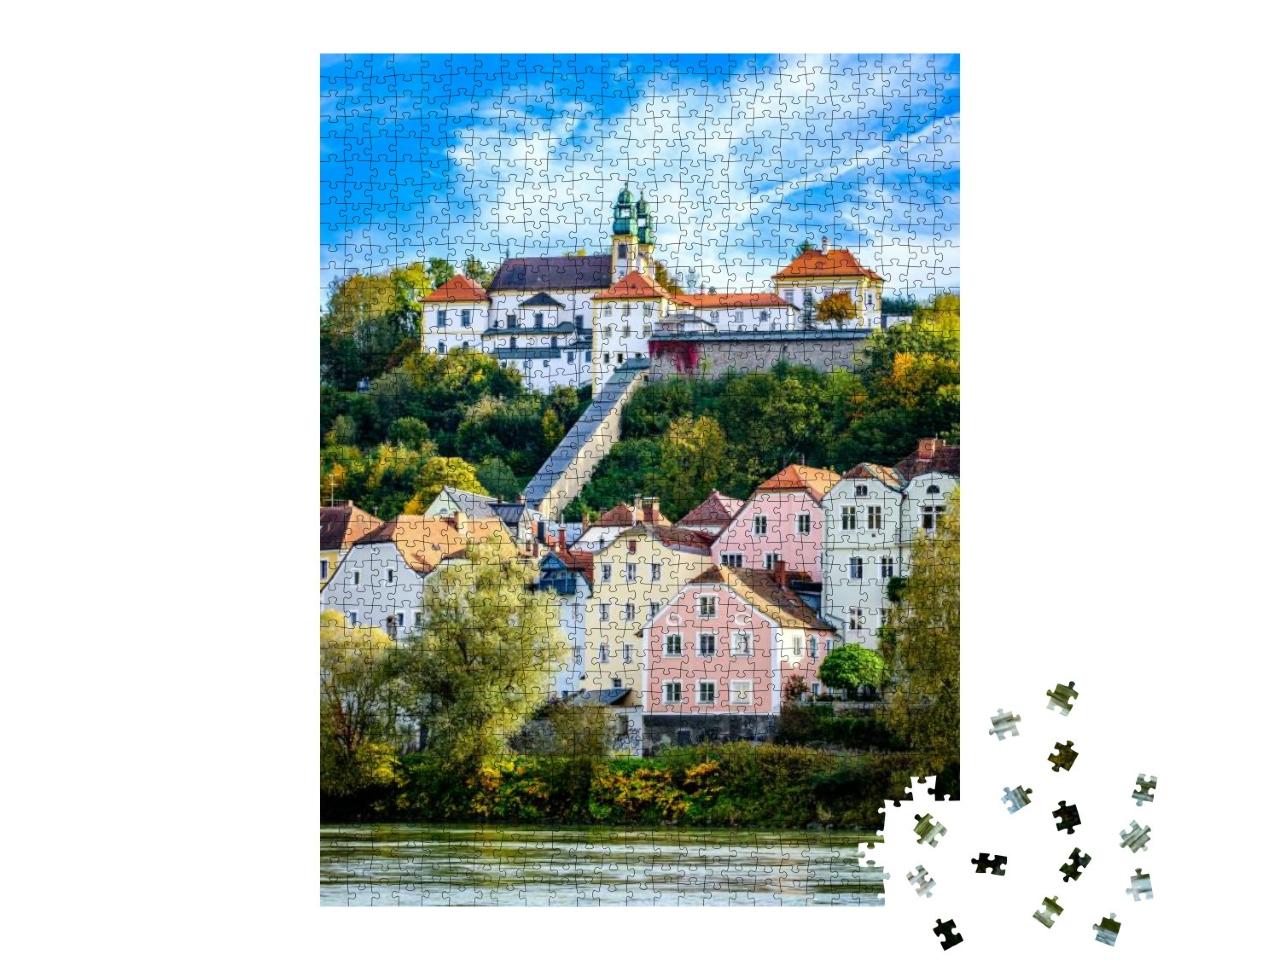 Old Town of the Famous Bavarian Village Passau... Jigsaw Puzzle with 1000 pieces